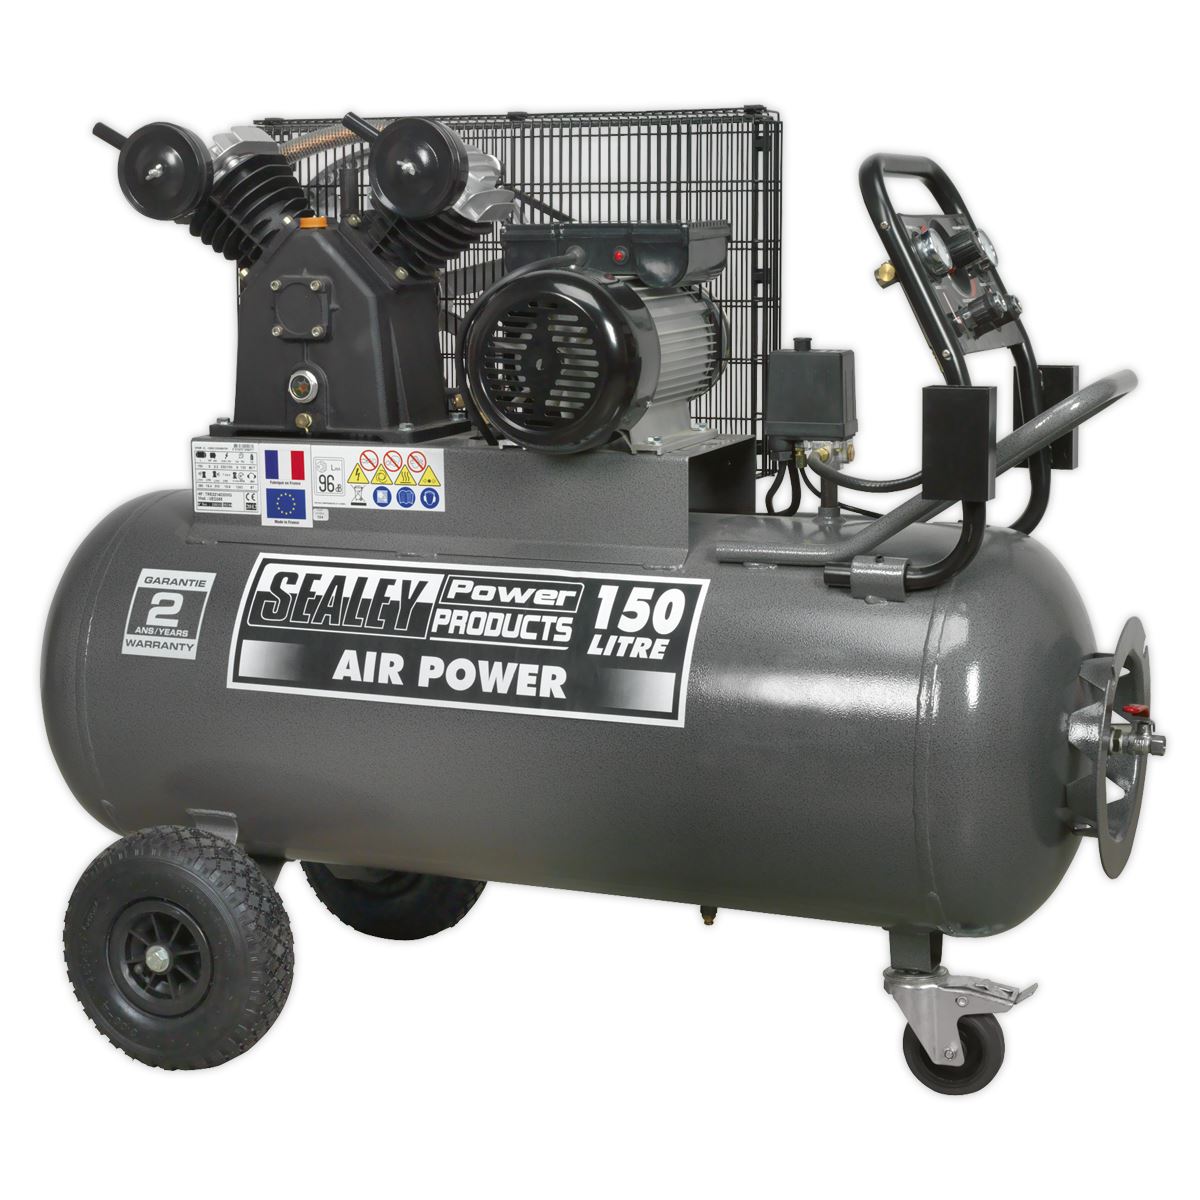 Sealey Premier Industrial Air Compressor 150L Belt Drive 3hp with Front Control Panel